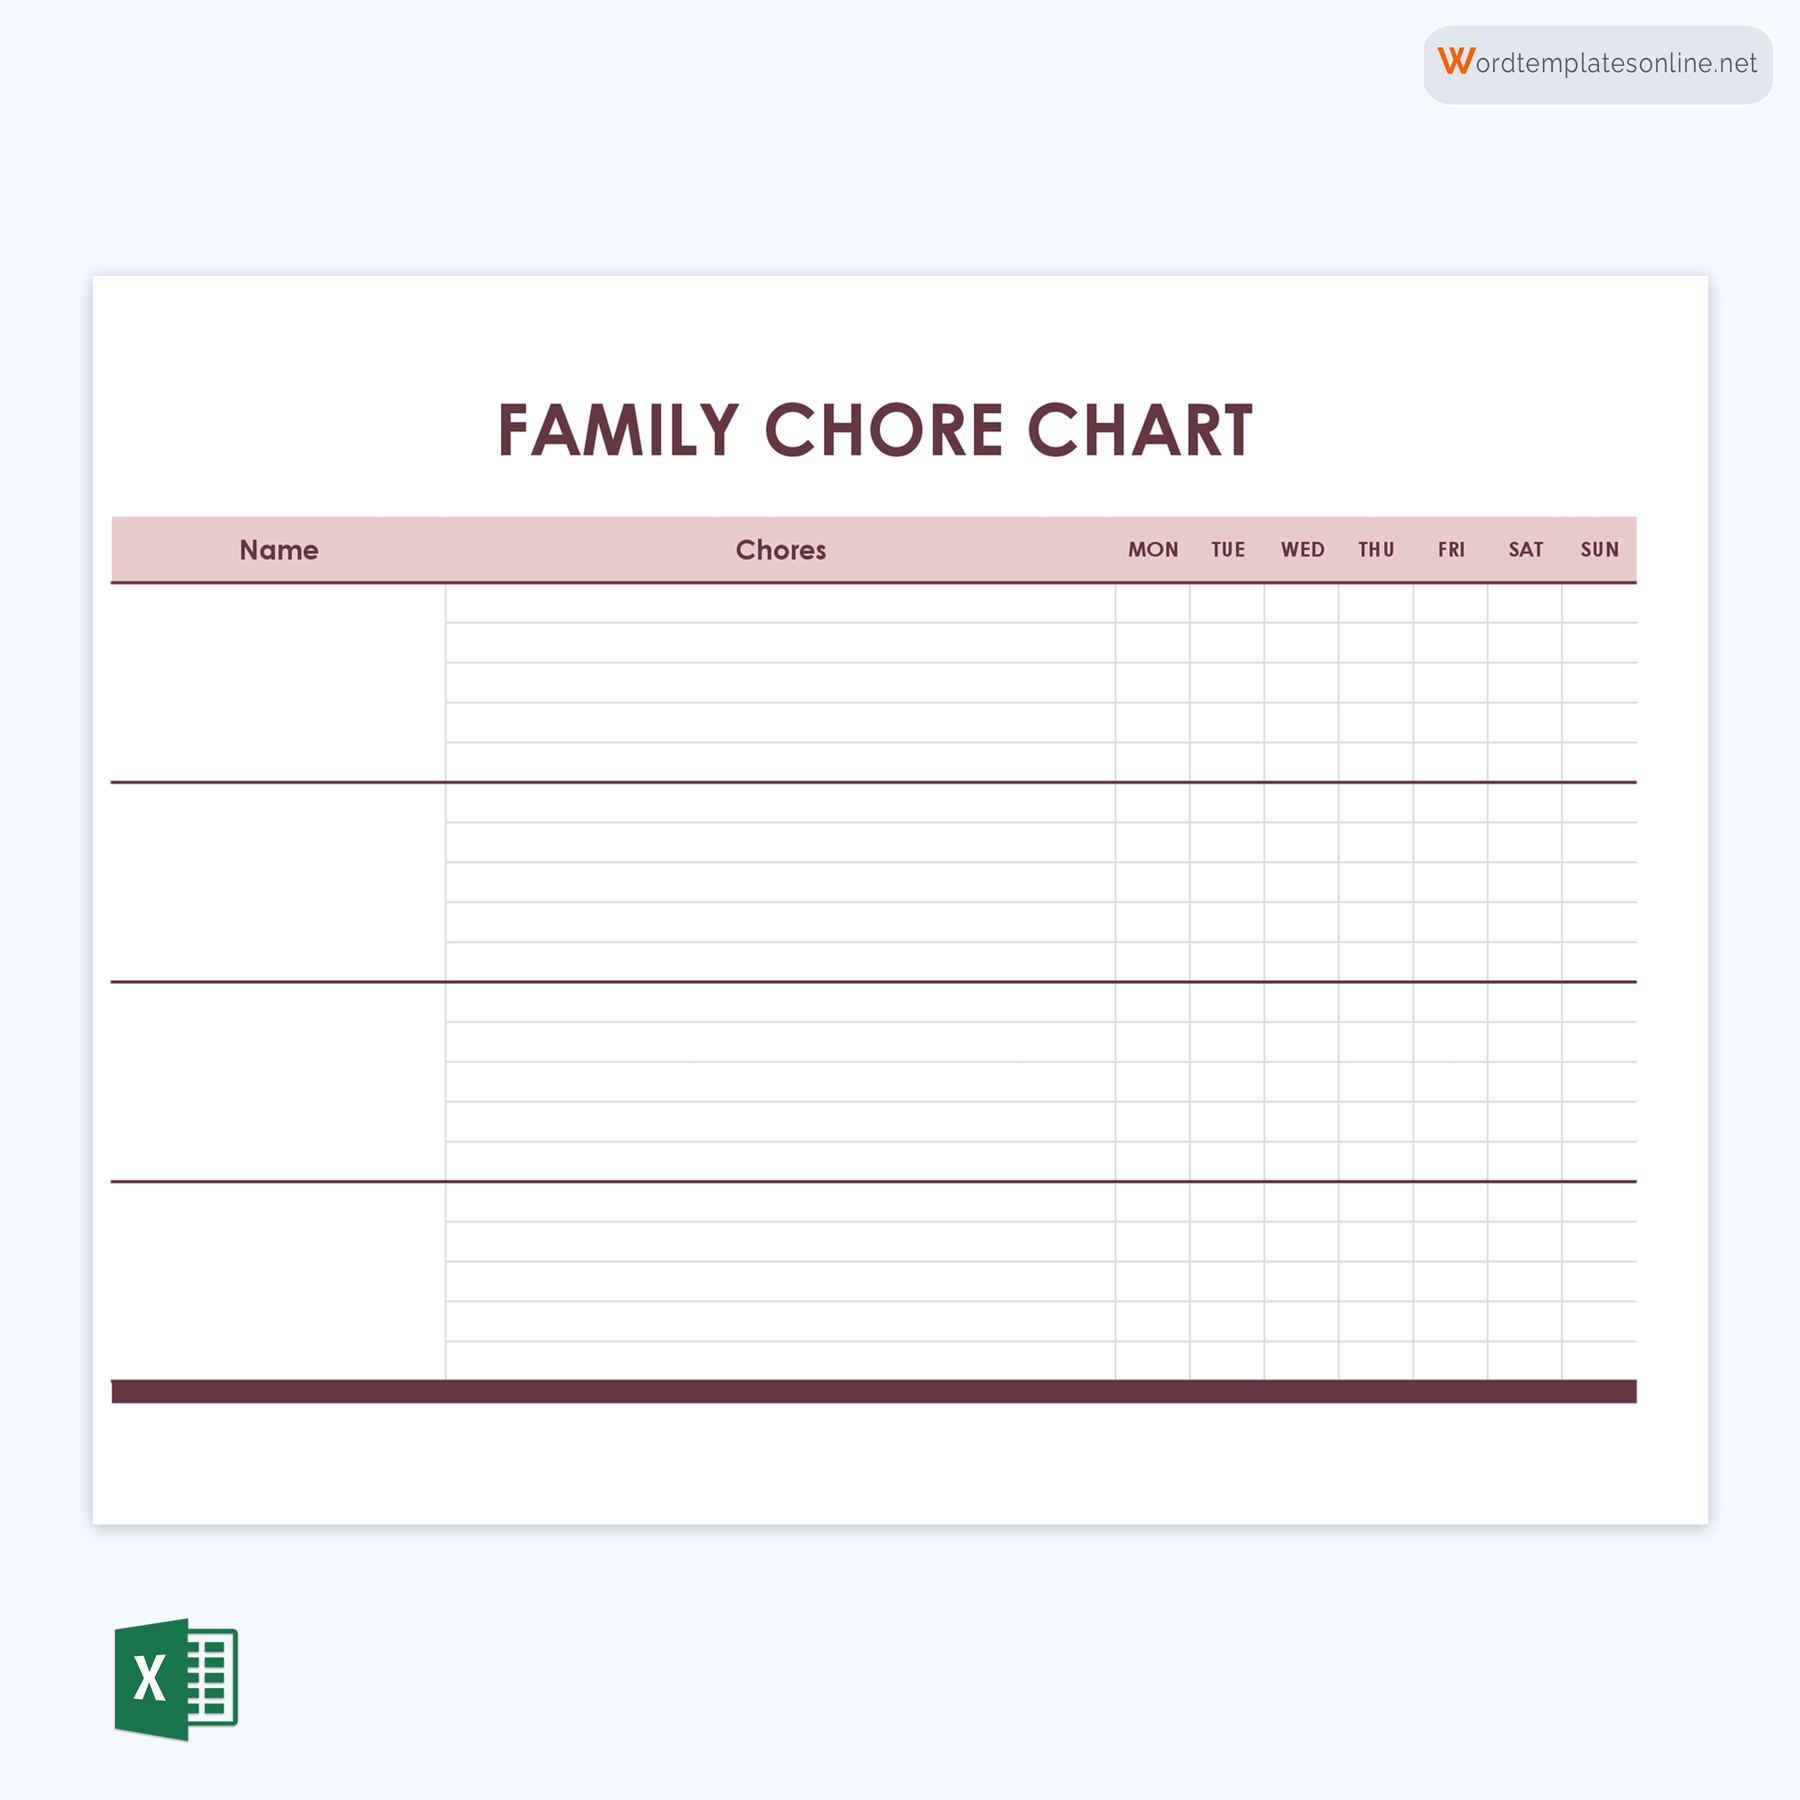 Editable Family Chore Chart Template in Excel